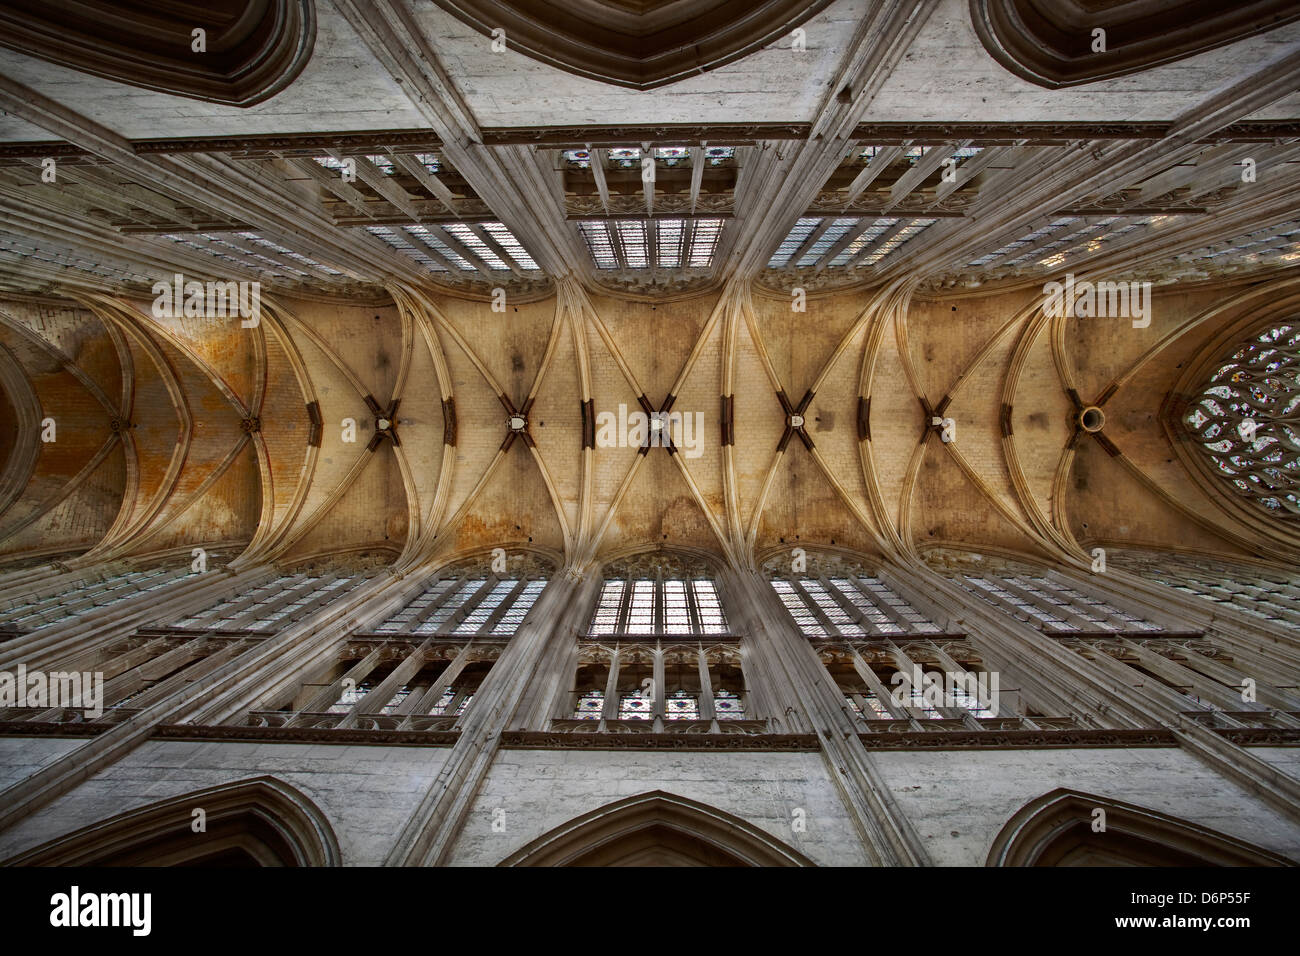 The vaulted ceiling of Vendome Abbey, Loire-et-Cher, Centre, France, Europe Stock Photo